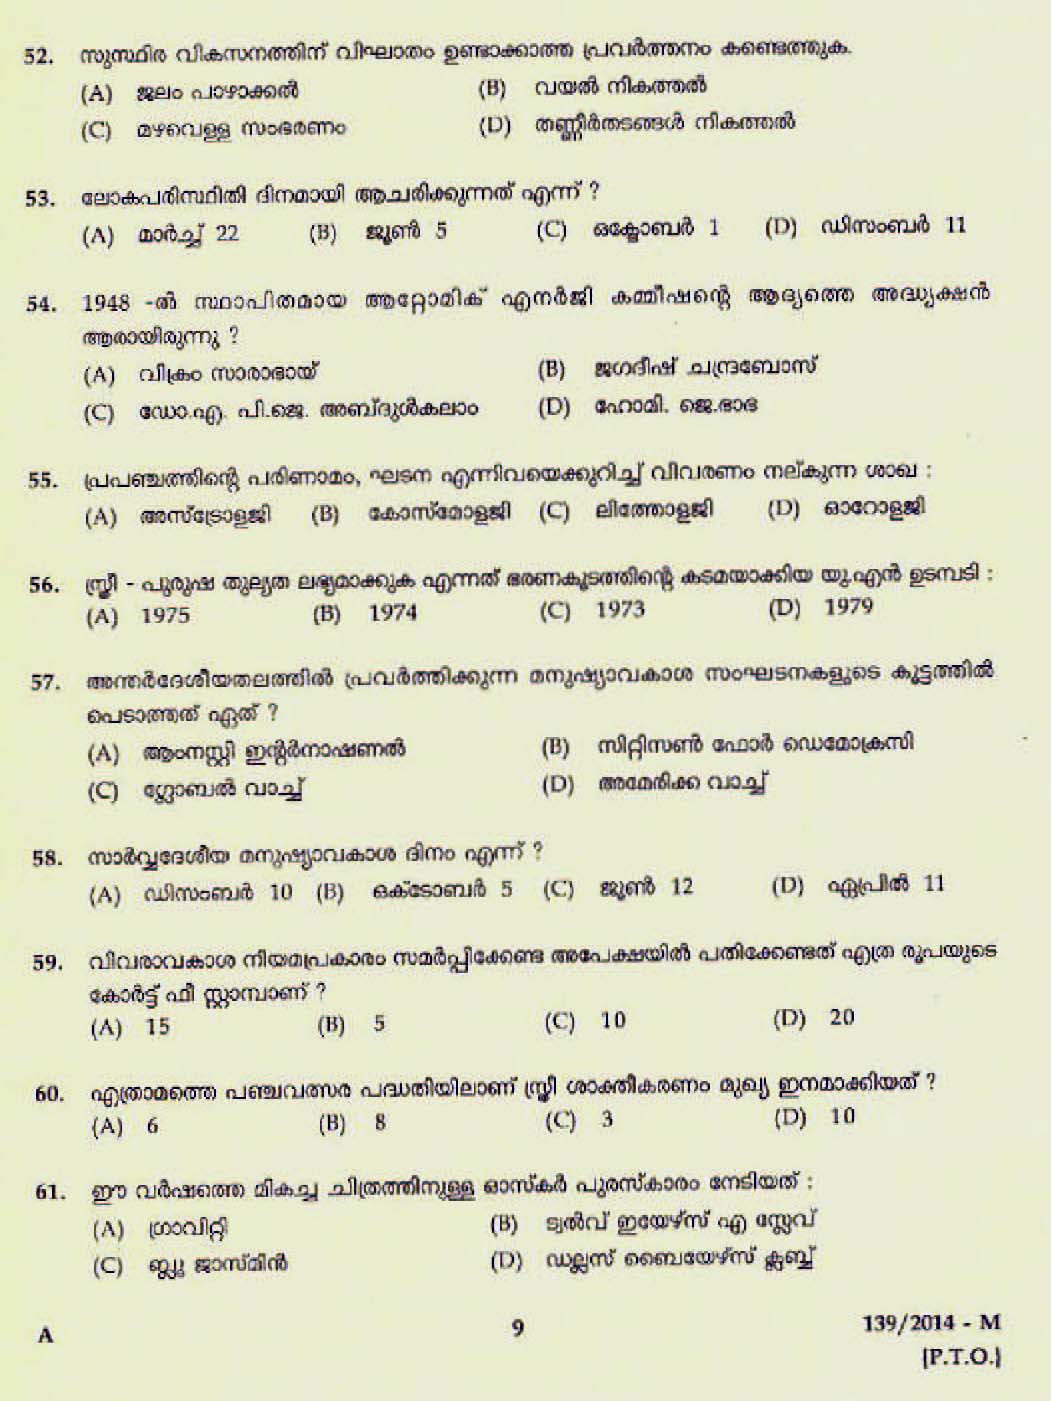 LD Clerk Various Question Paper Malayalam 2014 Paper Code 1392014 M 7